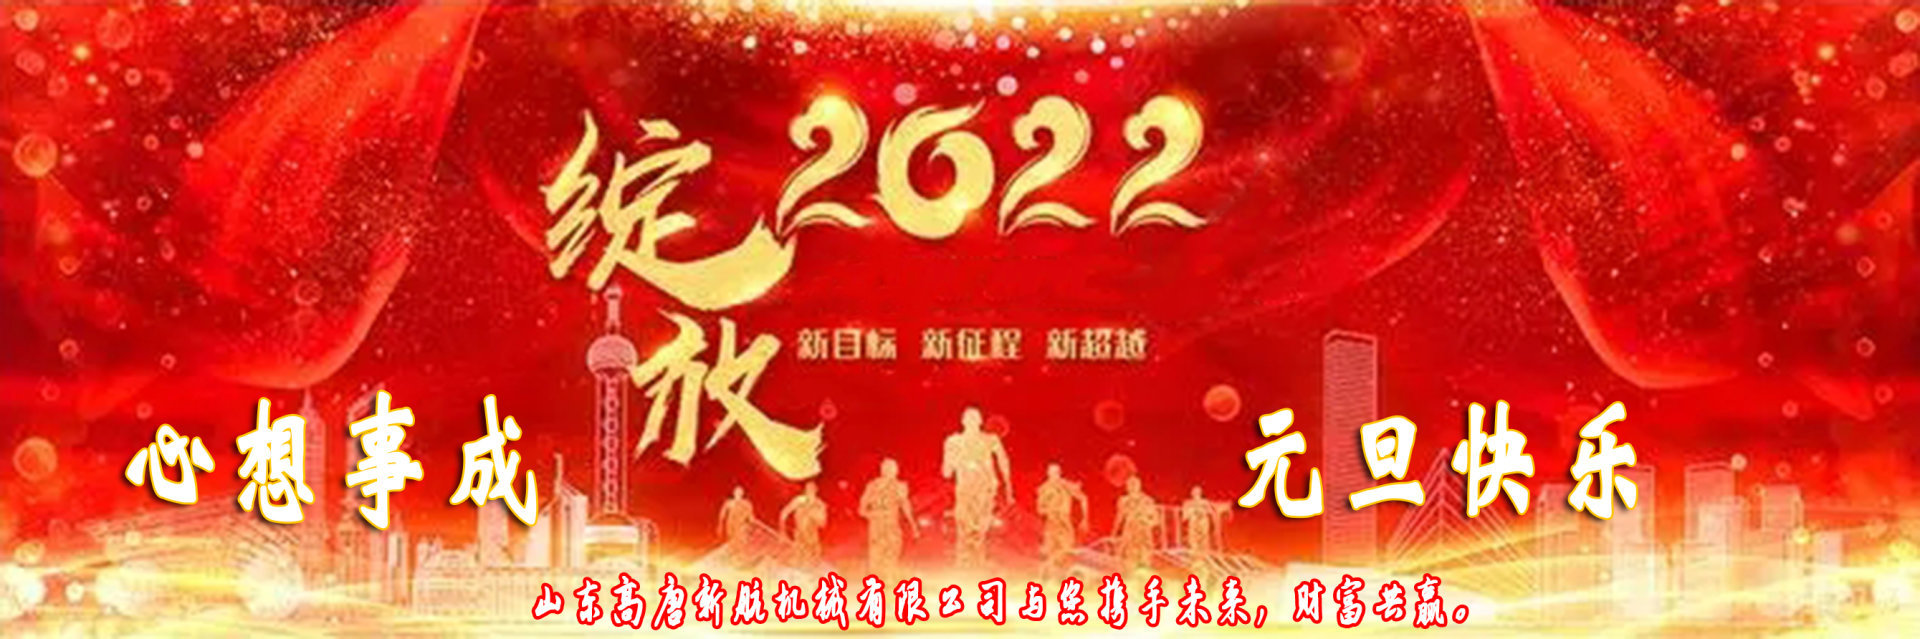 Xin Hang trenchers wish everyone: Happy New Year's Day